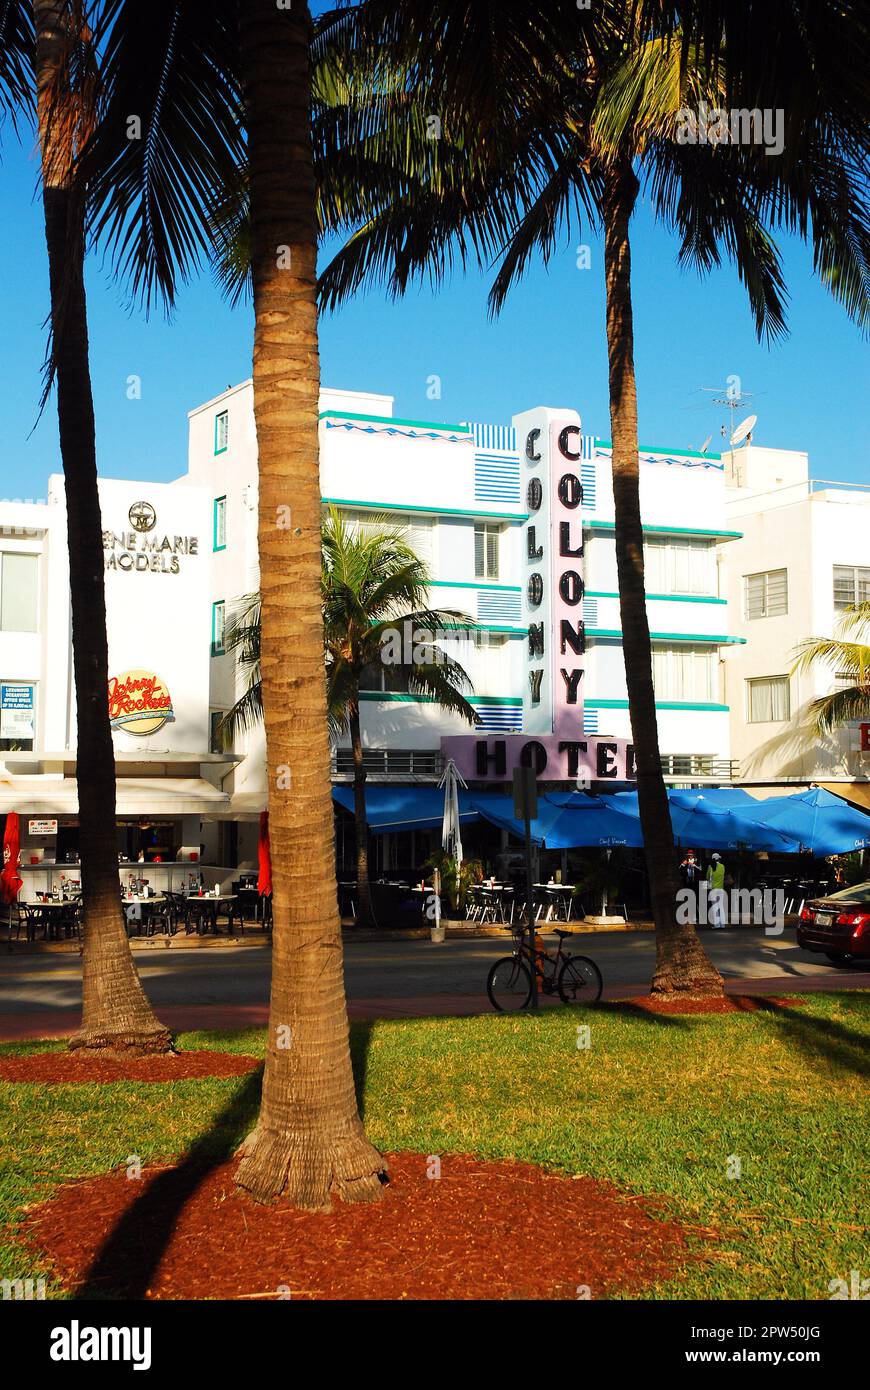 The Art Deco Hotels of Miami Beach are framed by the palm trees from across the street Stock Photo